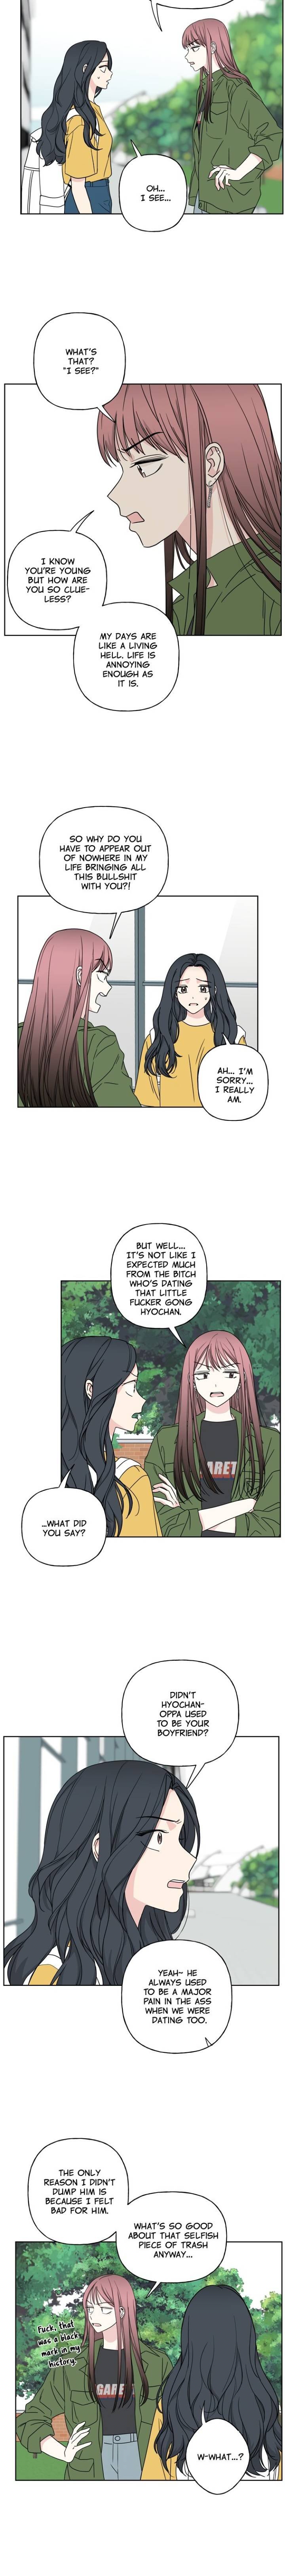 mother-im-sorry-chap-25-9